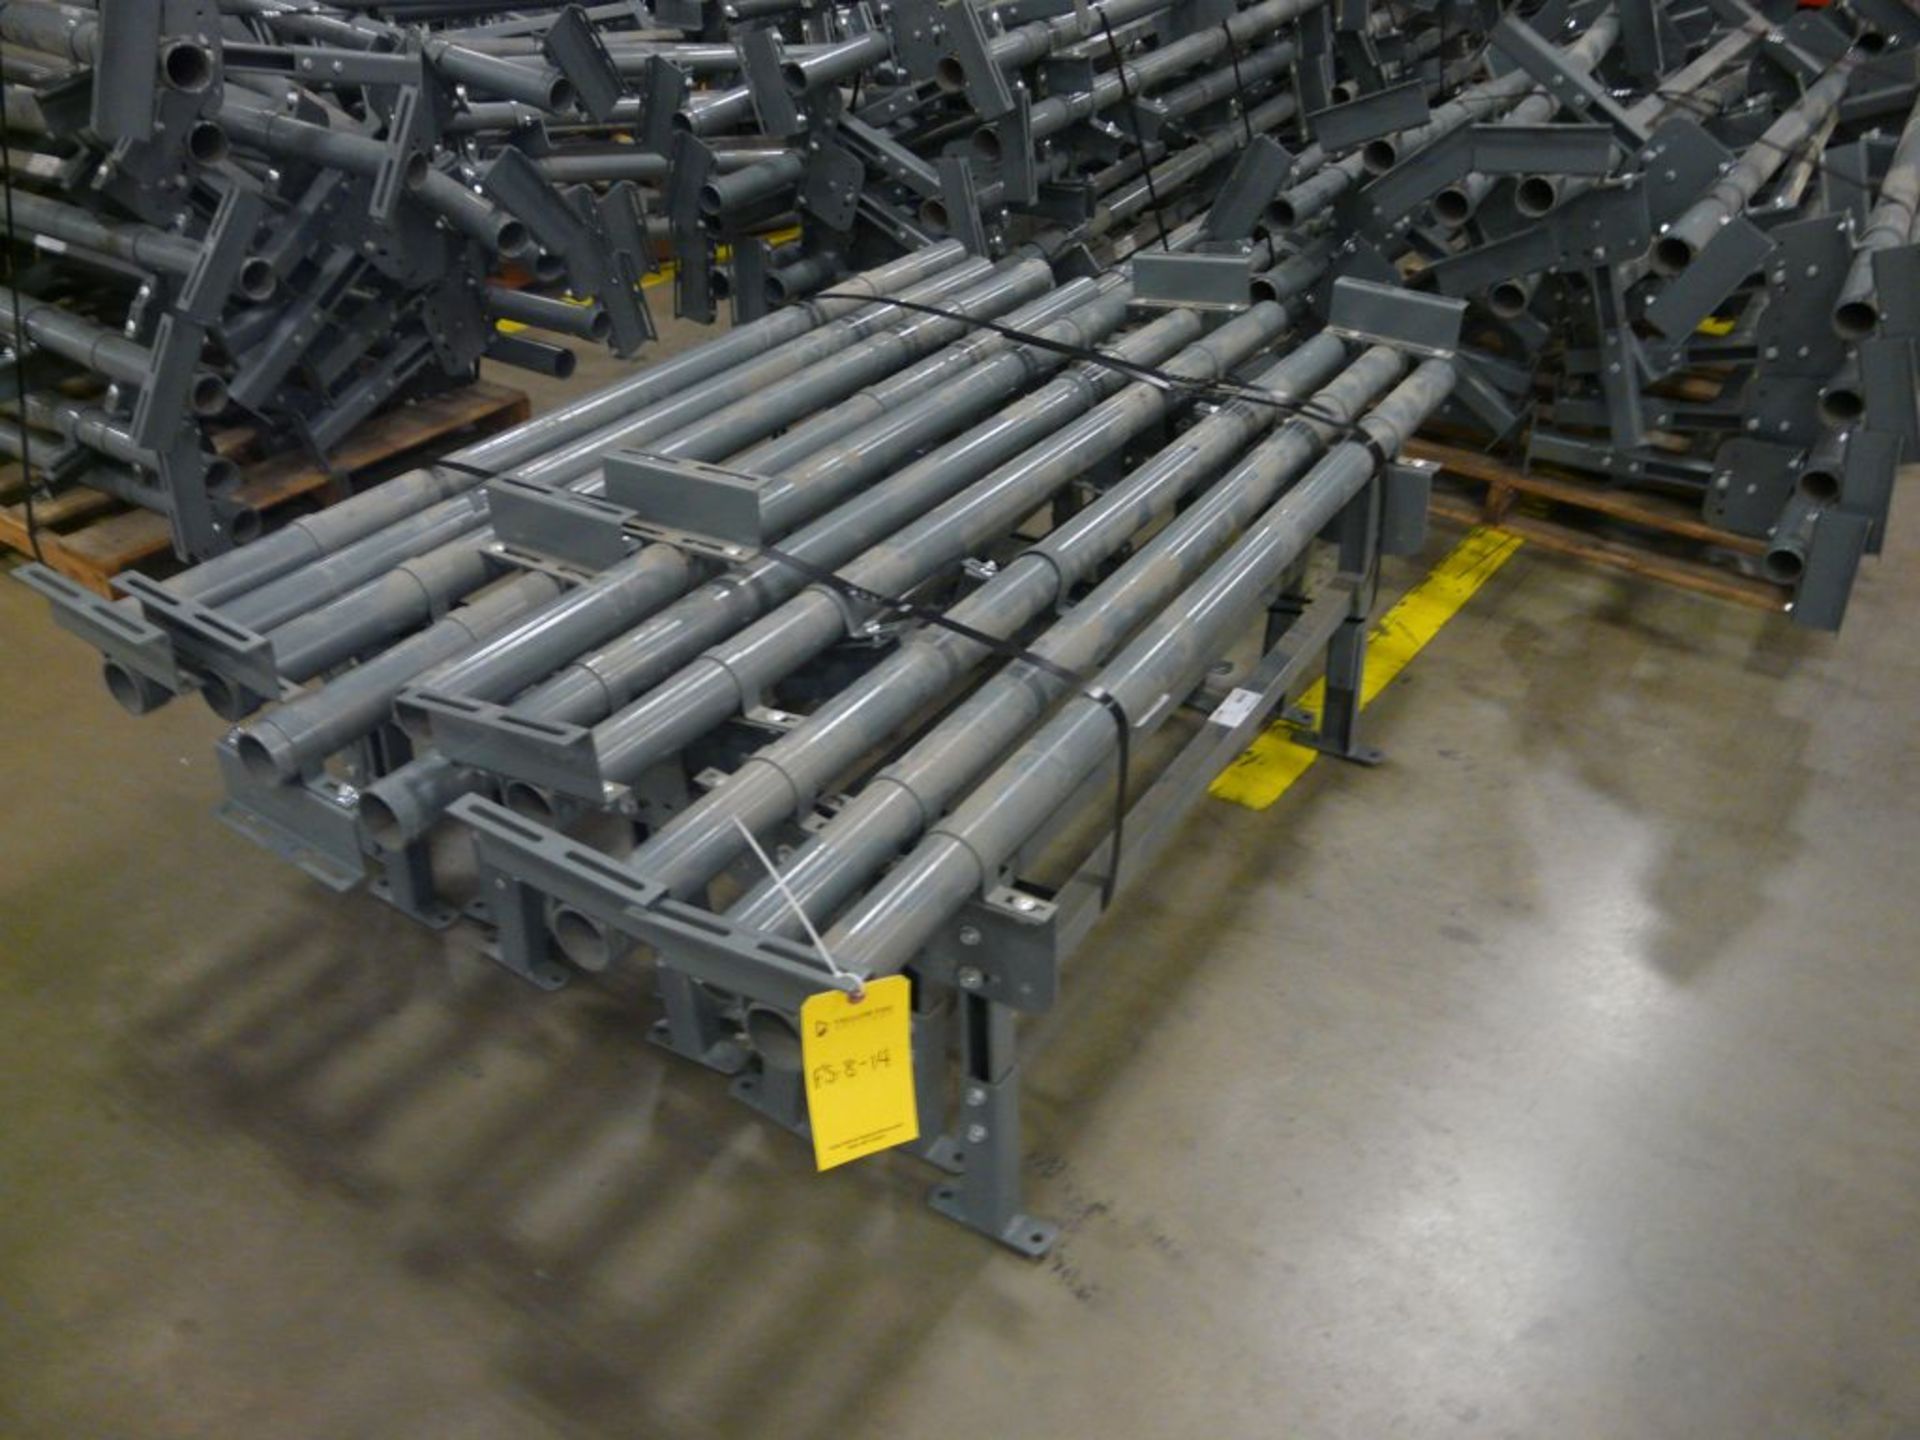 Lot of (5) USA Floor Supports - Brace: 71"L; Stand: 44"L x 19"H; Tag: 223844 - $30 Lot Loading Fee - Image 2 of 4